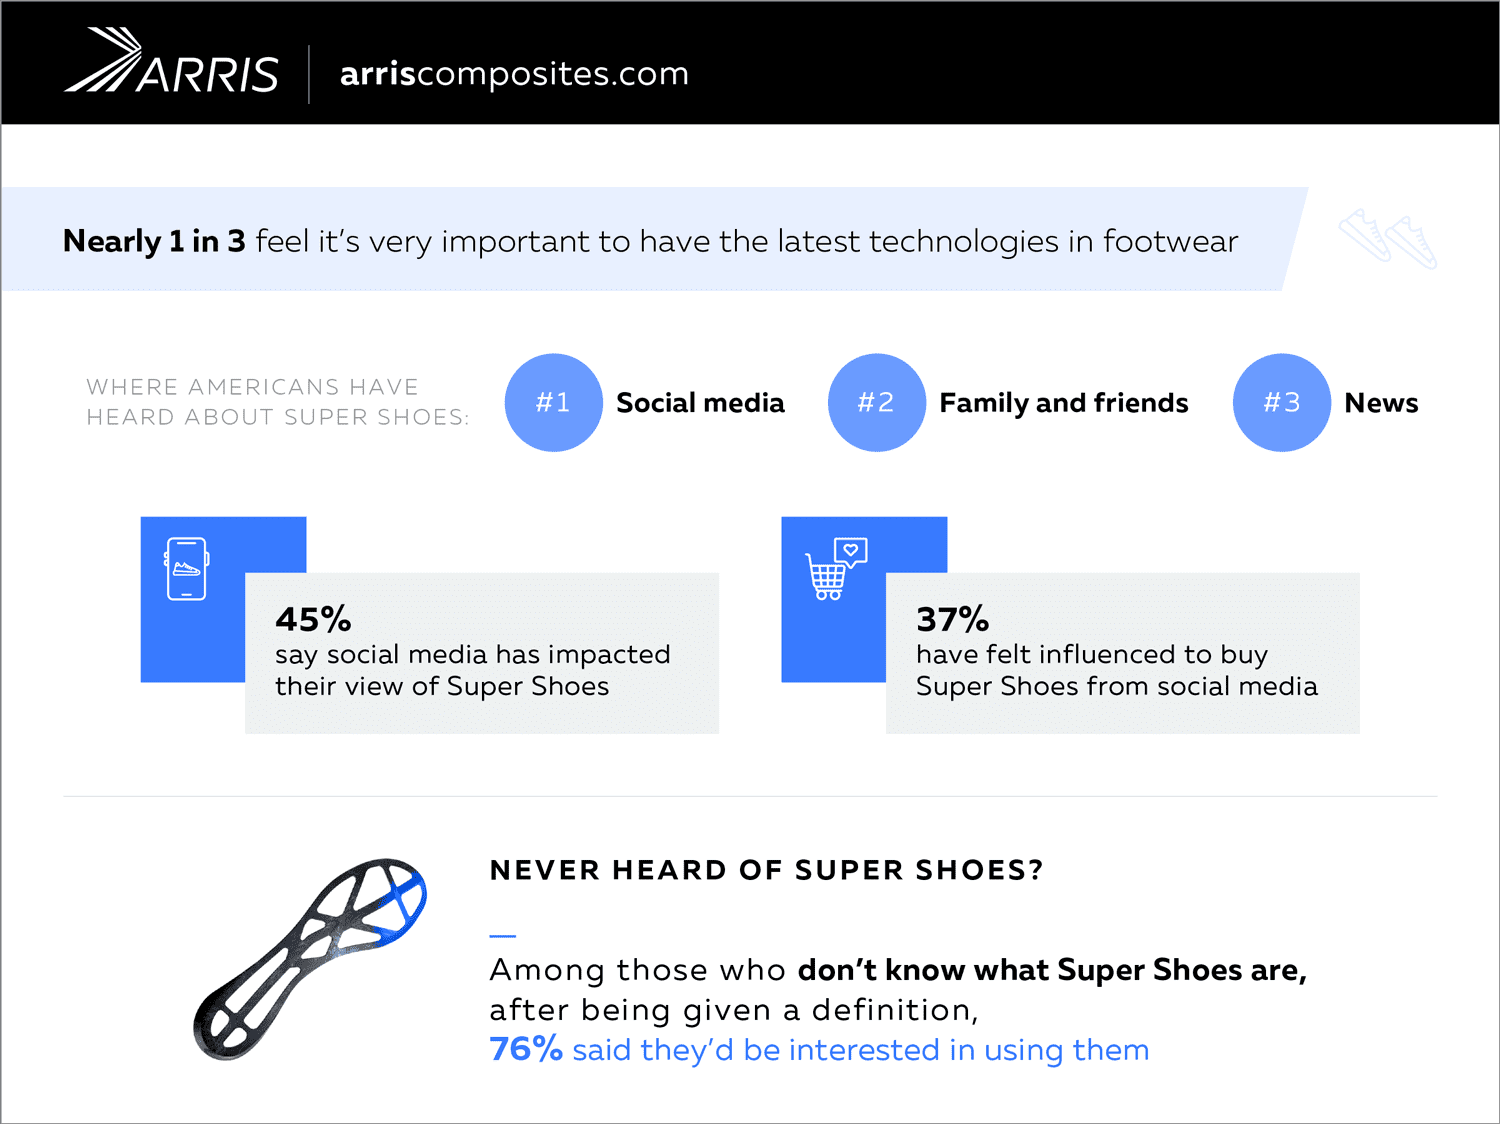 Americans Interest in Super Shoes (High Performance Footwear) Infographic from ArrisComposites.com